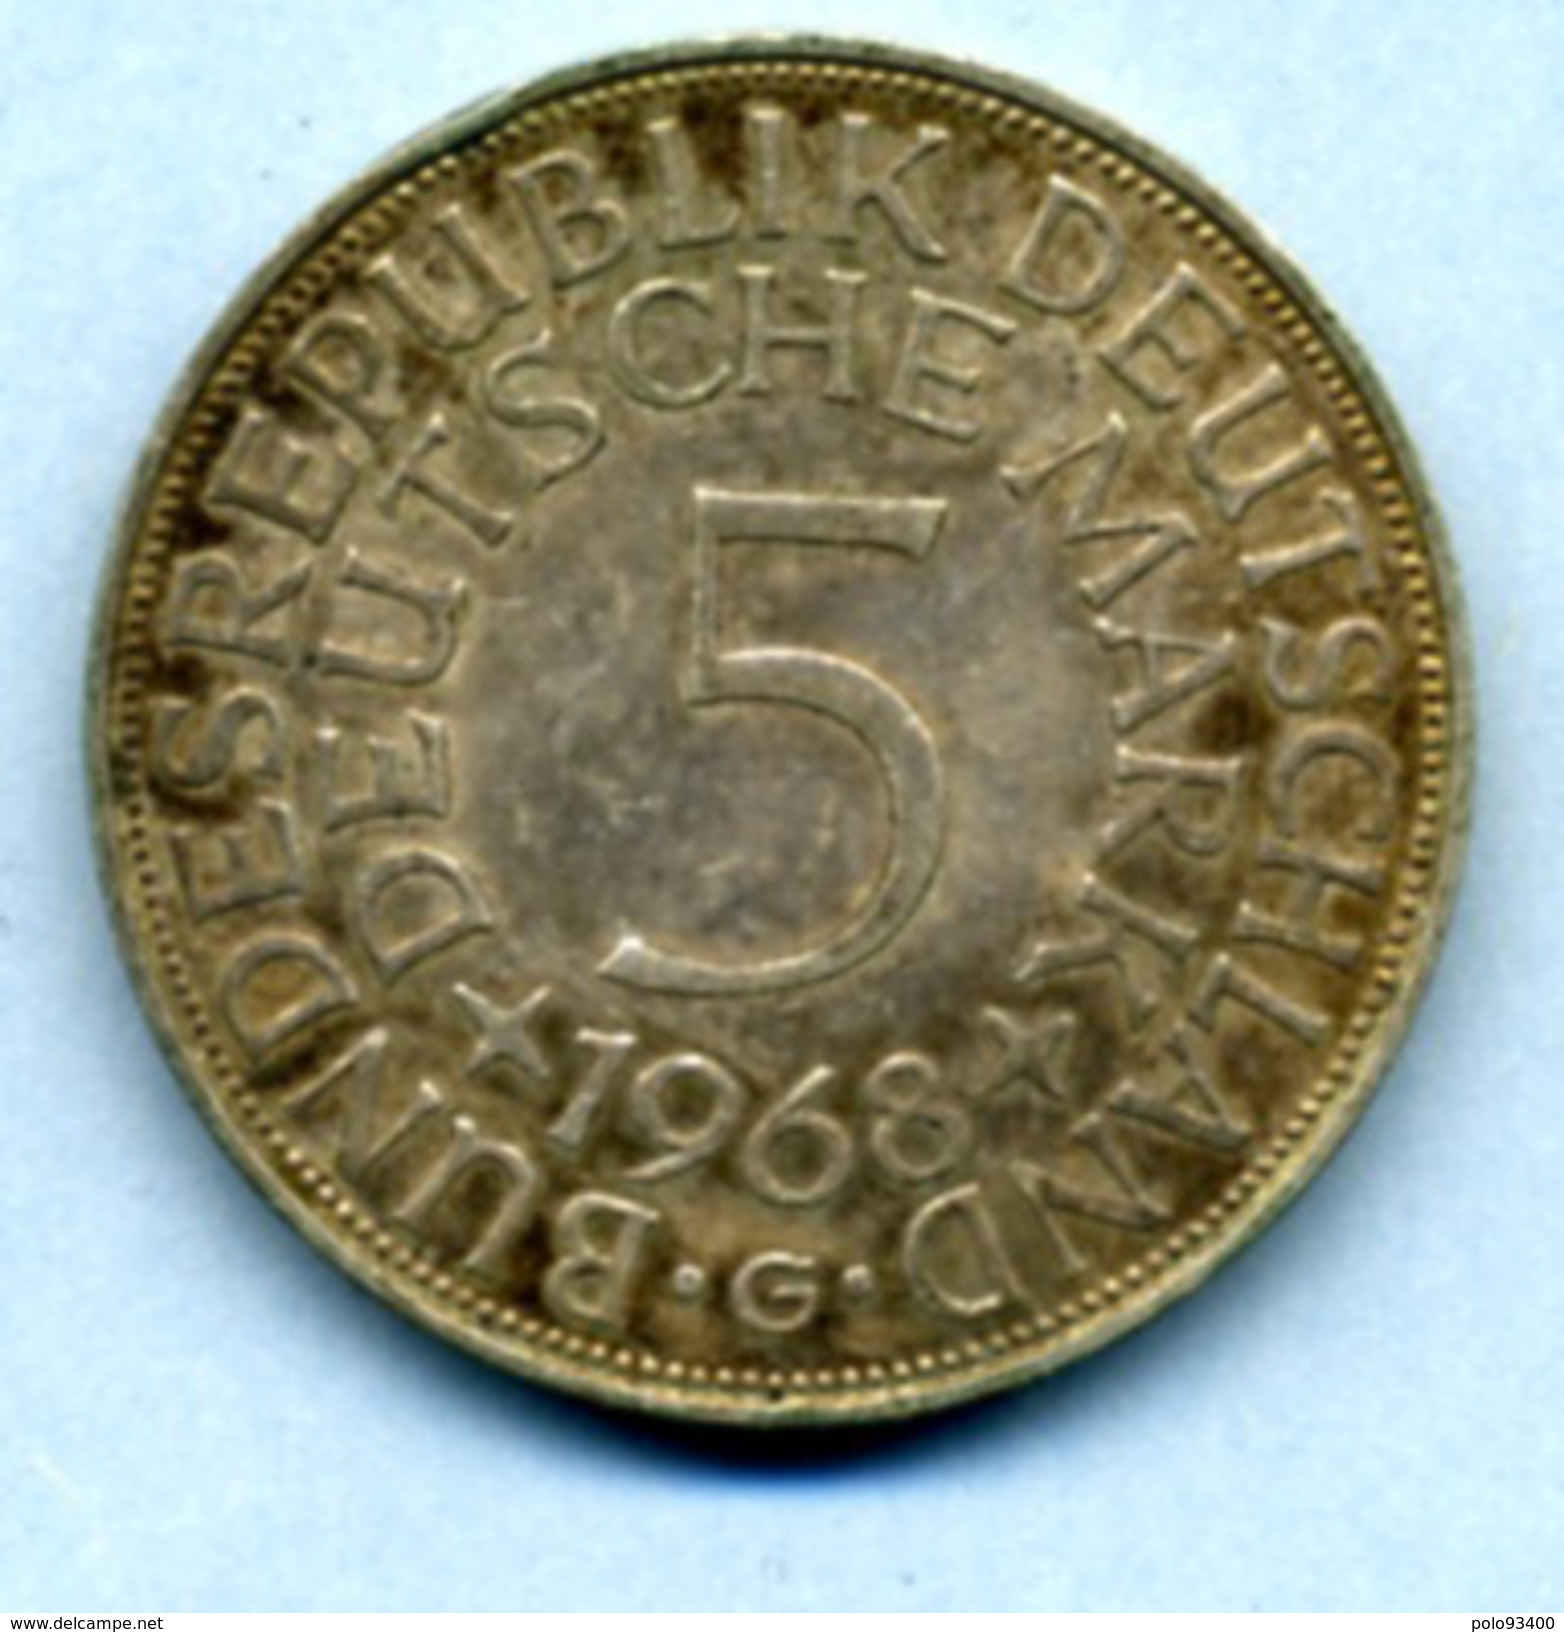 1968 G 5 MARKS SILVER - 5 Marcos